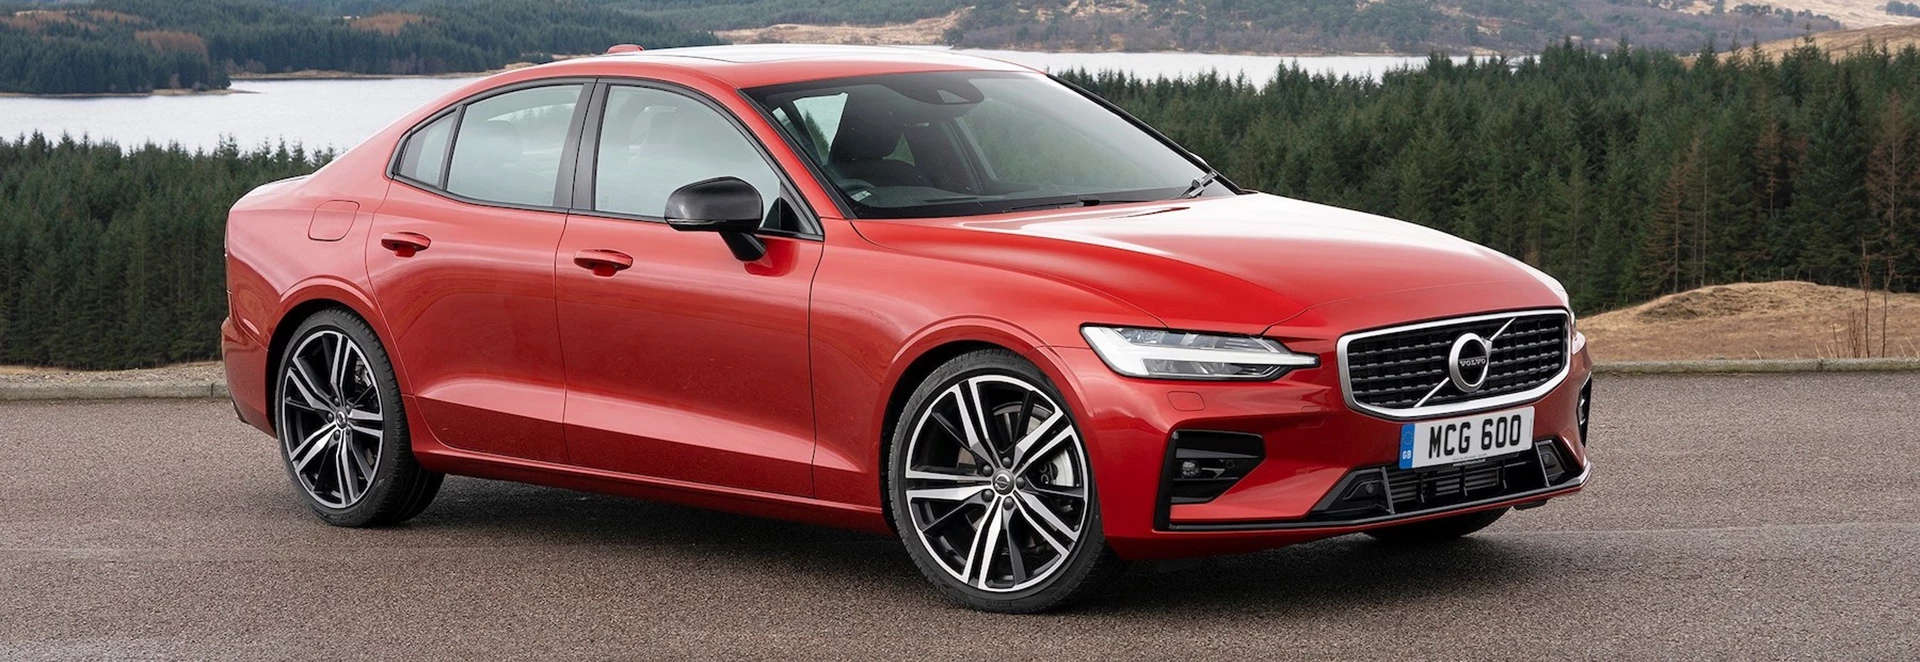 Volvo S60 range grows with new plug-in hybrid